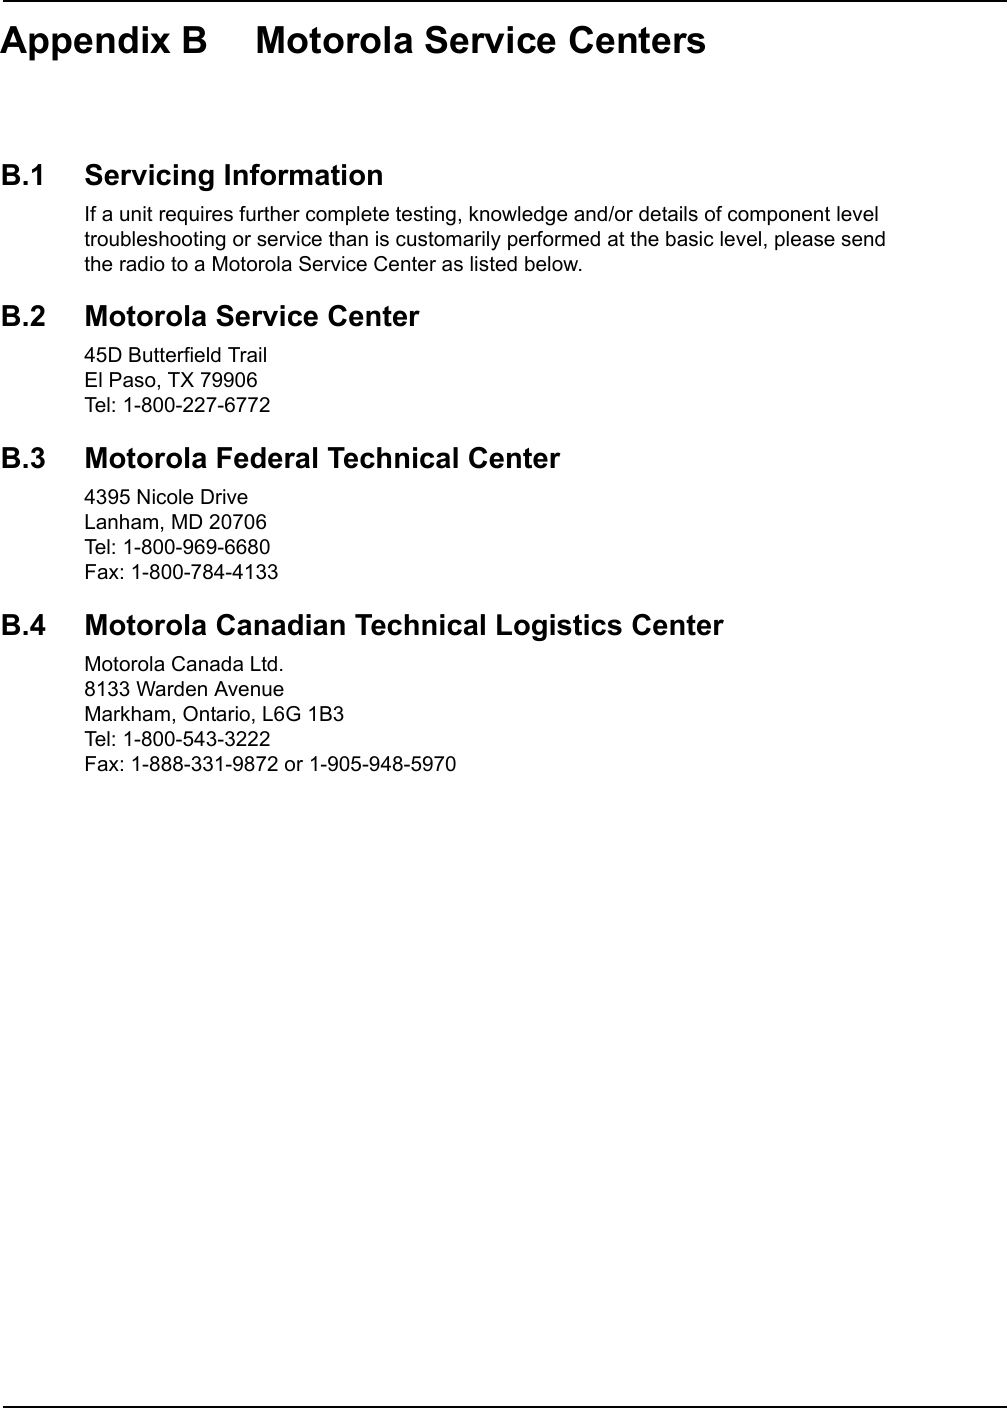 Appendix B Motorola Service CentersB.1 Servicing InformationIf a unit requires further complete testing, knowledge and/or details of component level troubleshooting or service than is customarily performed at the basic level, please send  the radio to a Motorola Service Center as listed below.B.2 Motorola Service Center45D Butterfield Trail El Paso, TX 79906 Tel: 1-800-227-6772B.3 Motorola Federal Technical Center4395 Nicole Drive Lanham, MD 20706 Tel: 1-800-969-6680 Fax: 1-800-784-4133B.4 Motorola Canadian Technical Logistics CenterMotorola Canada Ltd. 8133 Warden Avenue Markham, Ontario, L6G 1B3 Tel: 1-800-543-3222 Fax: 1-888-331-9872 or 1-905-948-5970